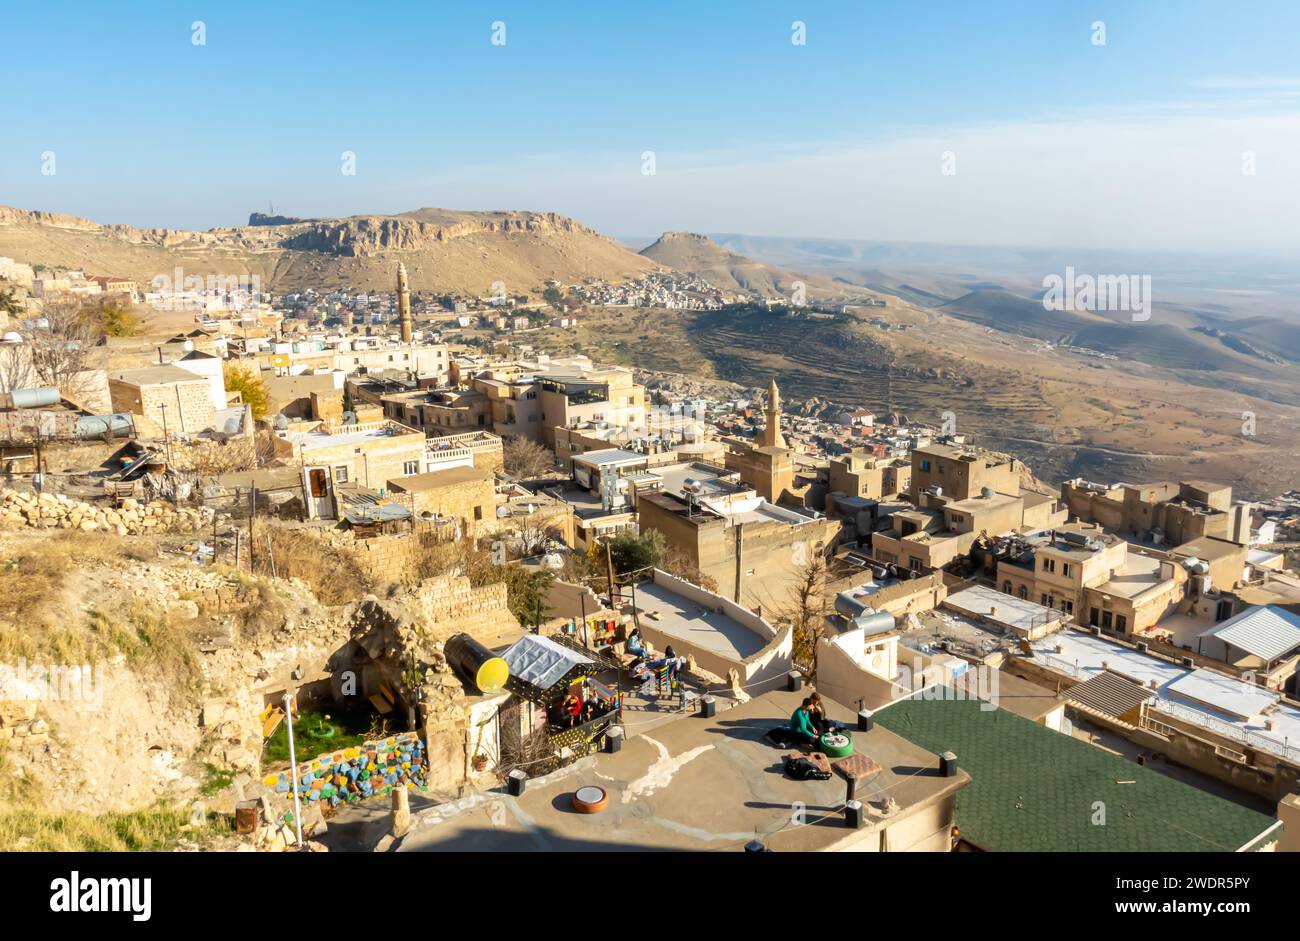 Rooftops of Mardin, roofs of central Mardin, the tourist destination in Southeastern Turkey. People at the rooftop cafes in Mardin Stock Photo